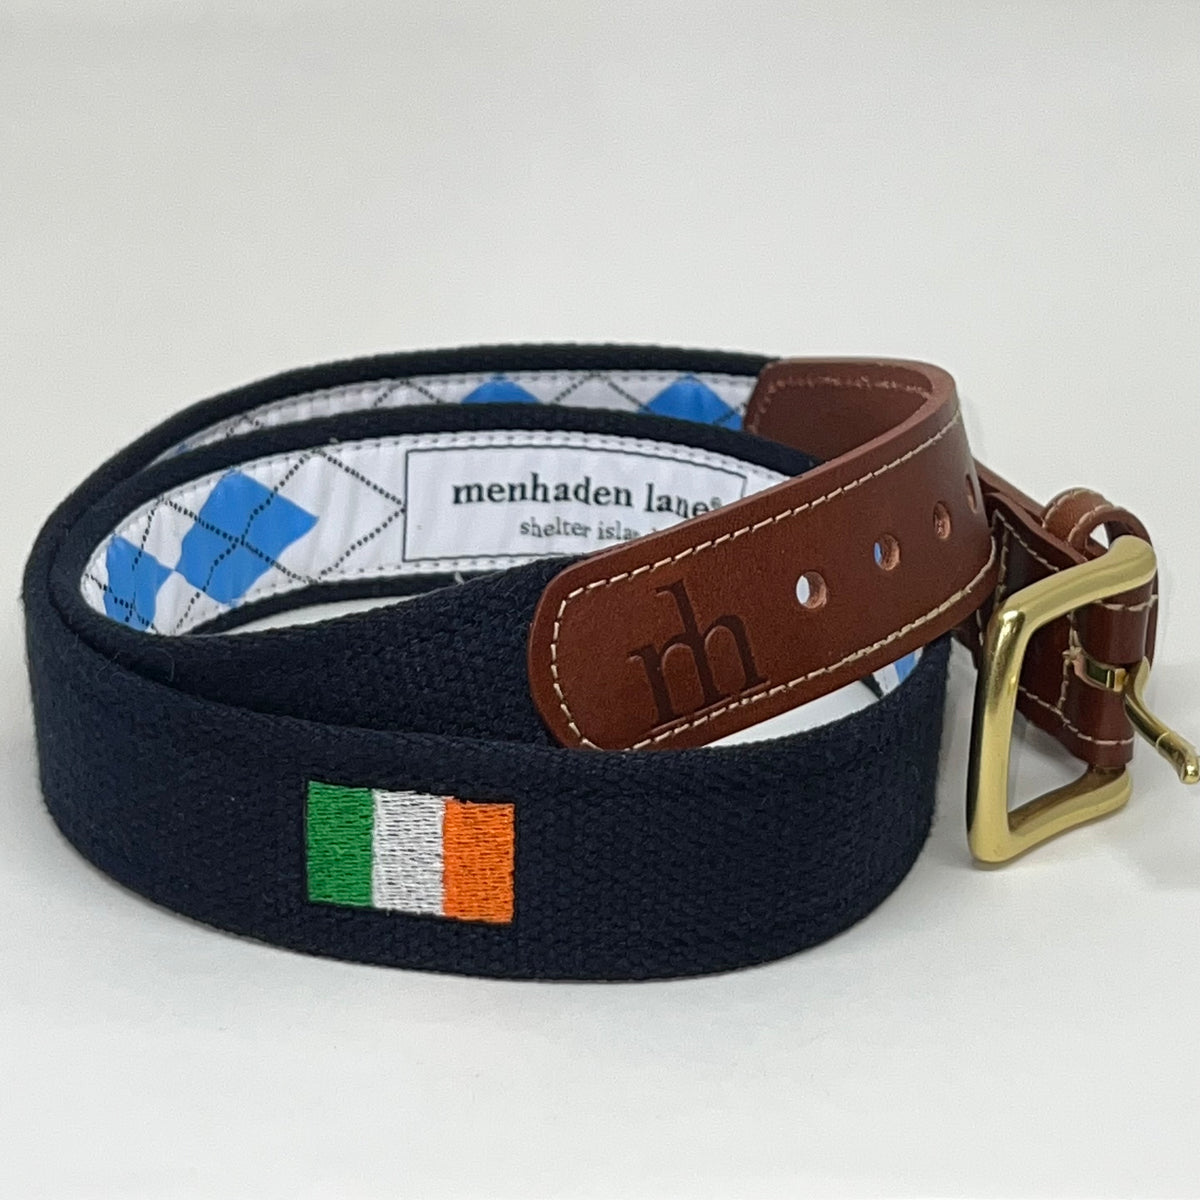 The "Tricolour" Embroidered on Navy